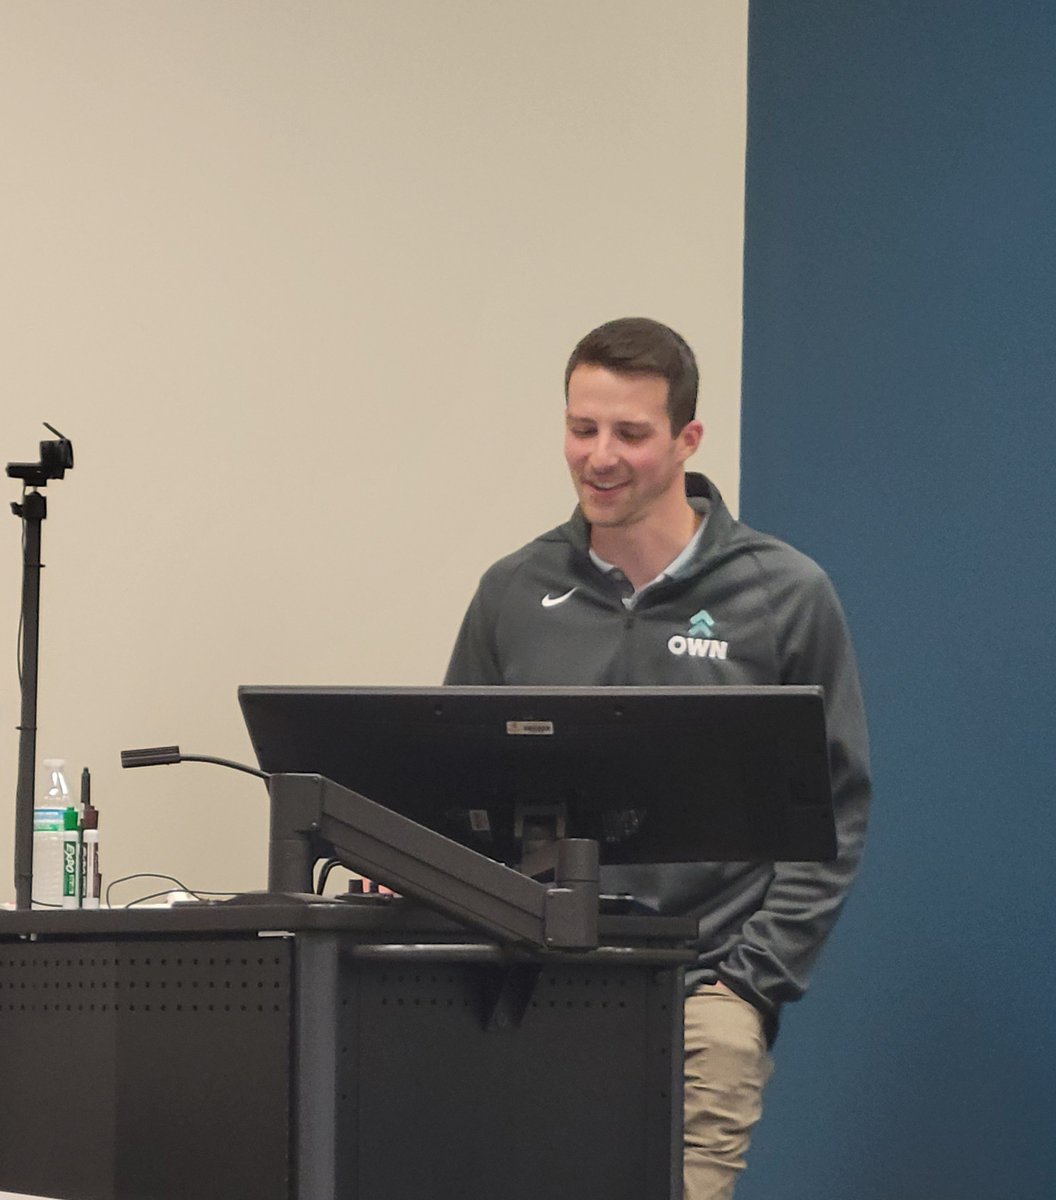 Our alumni Cameron Hole and Austin Wagner of @OWN_Engineering gave a wonderful and informative presentation to our officers and a few new members. @MissouriState @CNASatMSU @Engineering_MSU @SandT_CArE @MissouriSandT @KC_ASCE #minerbears #civilengineering #solvingfortomorrow